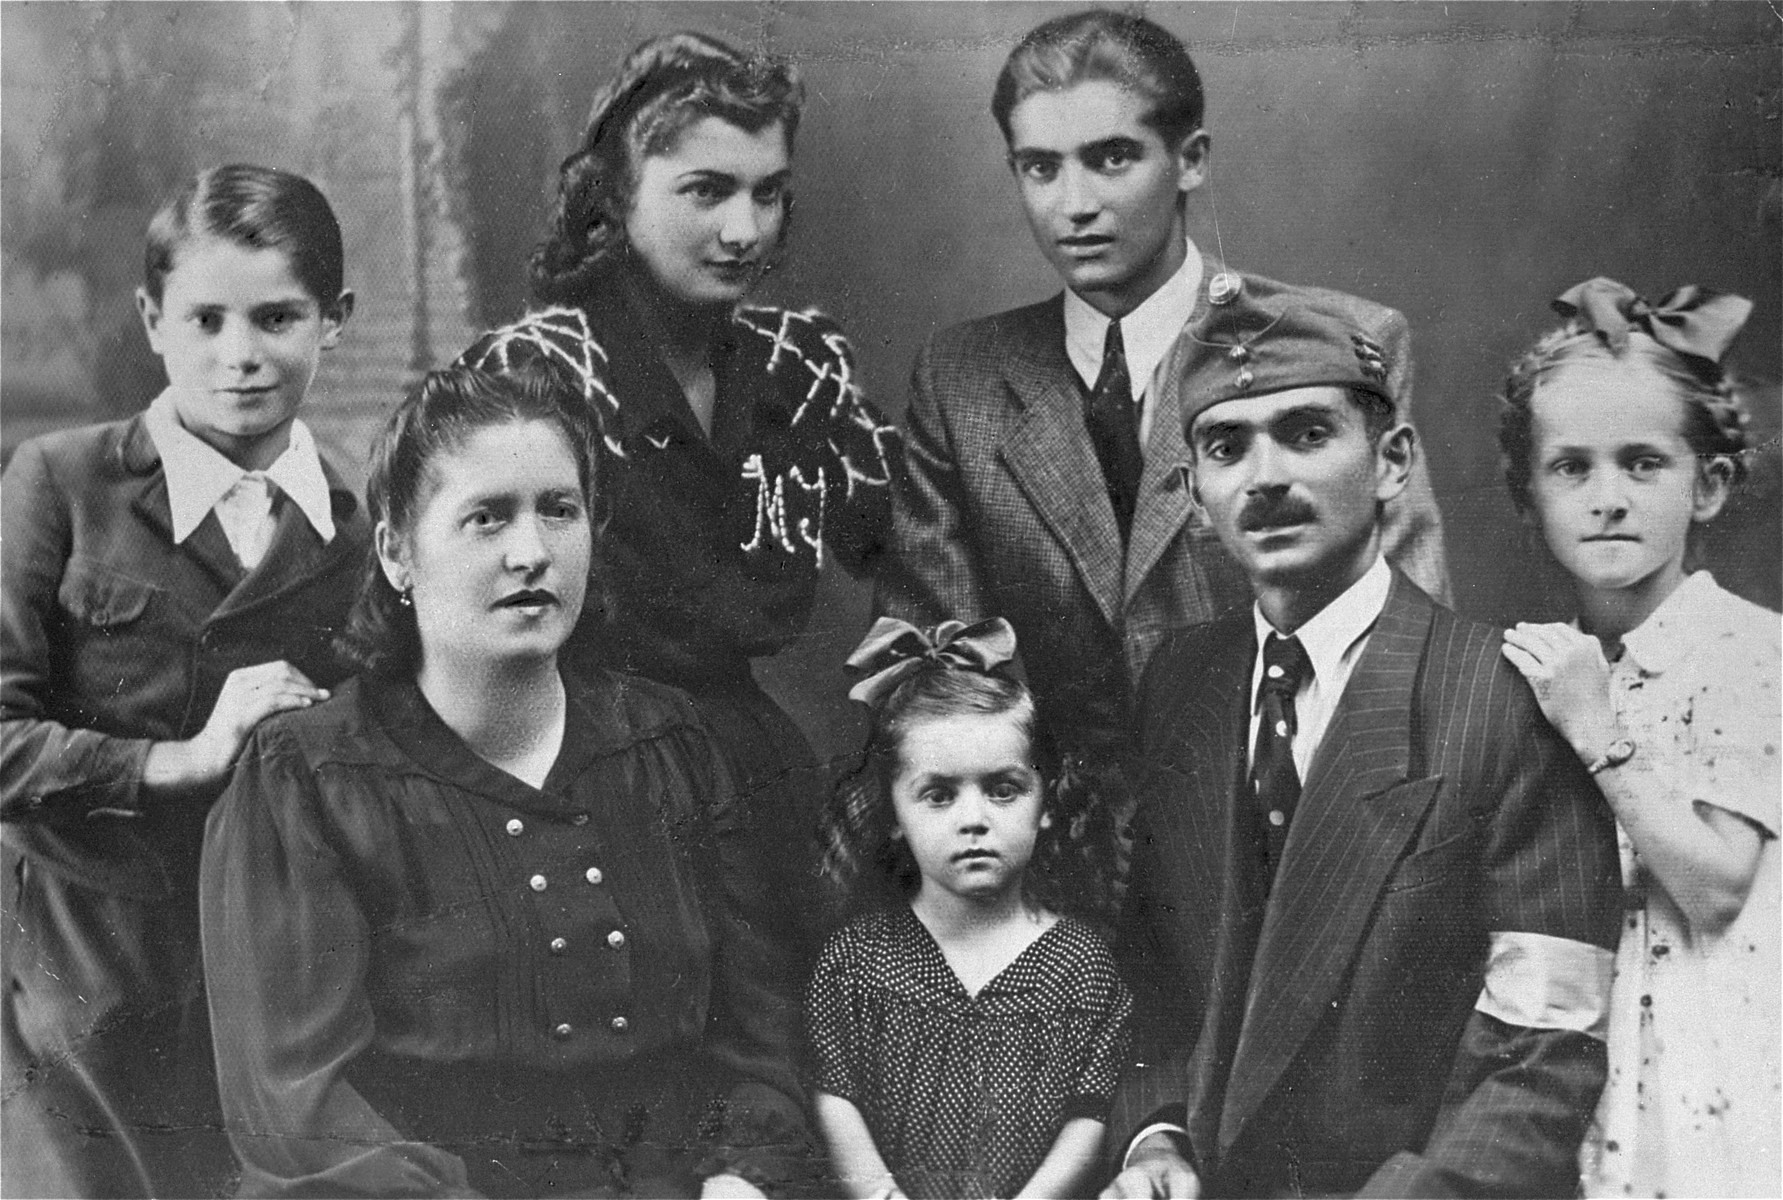 Studio portrait of the Markovits family in Cluj.  

Pictured in the front row (left to right) are: Irena, Eva, David, Ilonka; in the back row (left to right) are: Simon, Jolanda and Andre (the donor).

The photo was taken on the occasion of the visit by David Markovits, who had been allowed a one-day leave from his Hungarian labor brigade unit.  Immediately upon his return to the labor brigade, he was deported to Dachau.  David was liberated in Dachau, but died a short time after, on June 20, 1945.

The donor, Andre Markovits, who was liberated from Buchenwald, returned to Cluj after the war and retrieved this photo from the photographic studio in which it was taken in 1943.  Andre was the sole survivor of his family, who were all deported from the Cluj ghetto to Auschwitz in April, 1944.